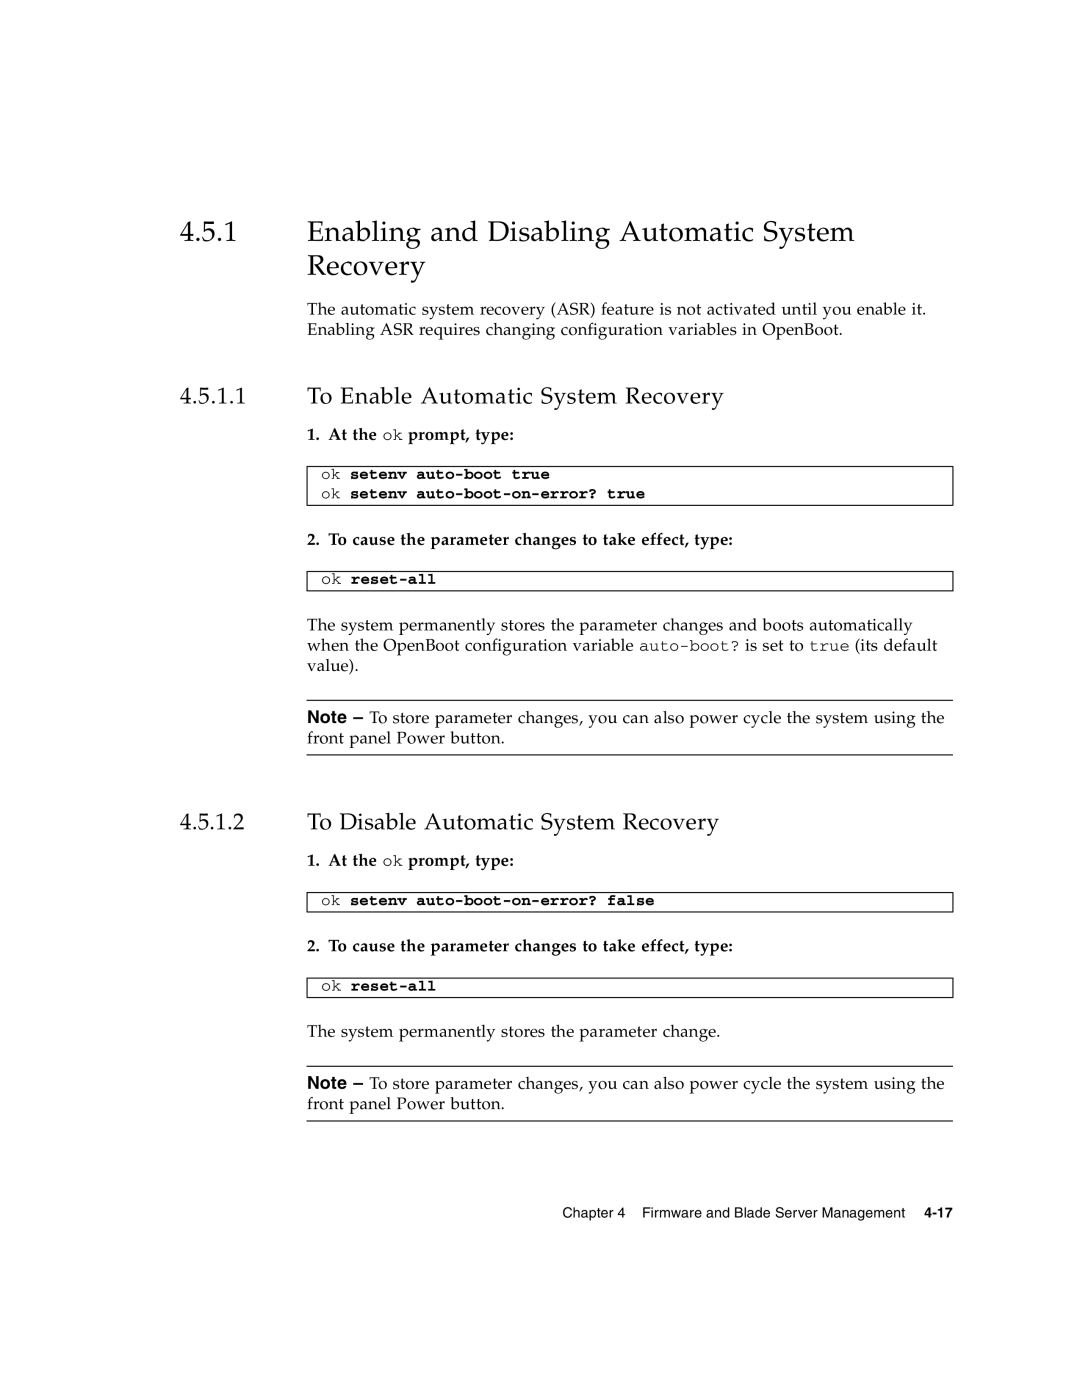 Sun Microsystems CP3260 manual Enabling and Disabling Automatic System Recovery, To Enable Automatic System Recovery 